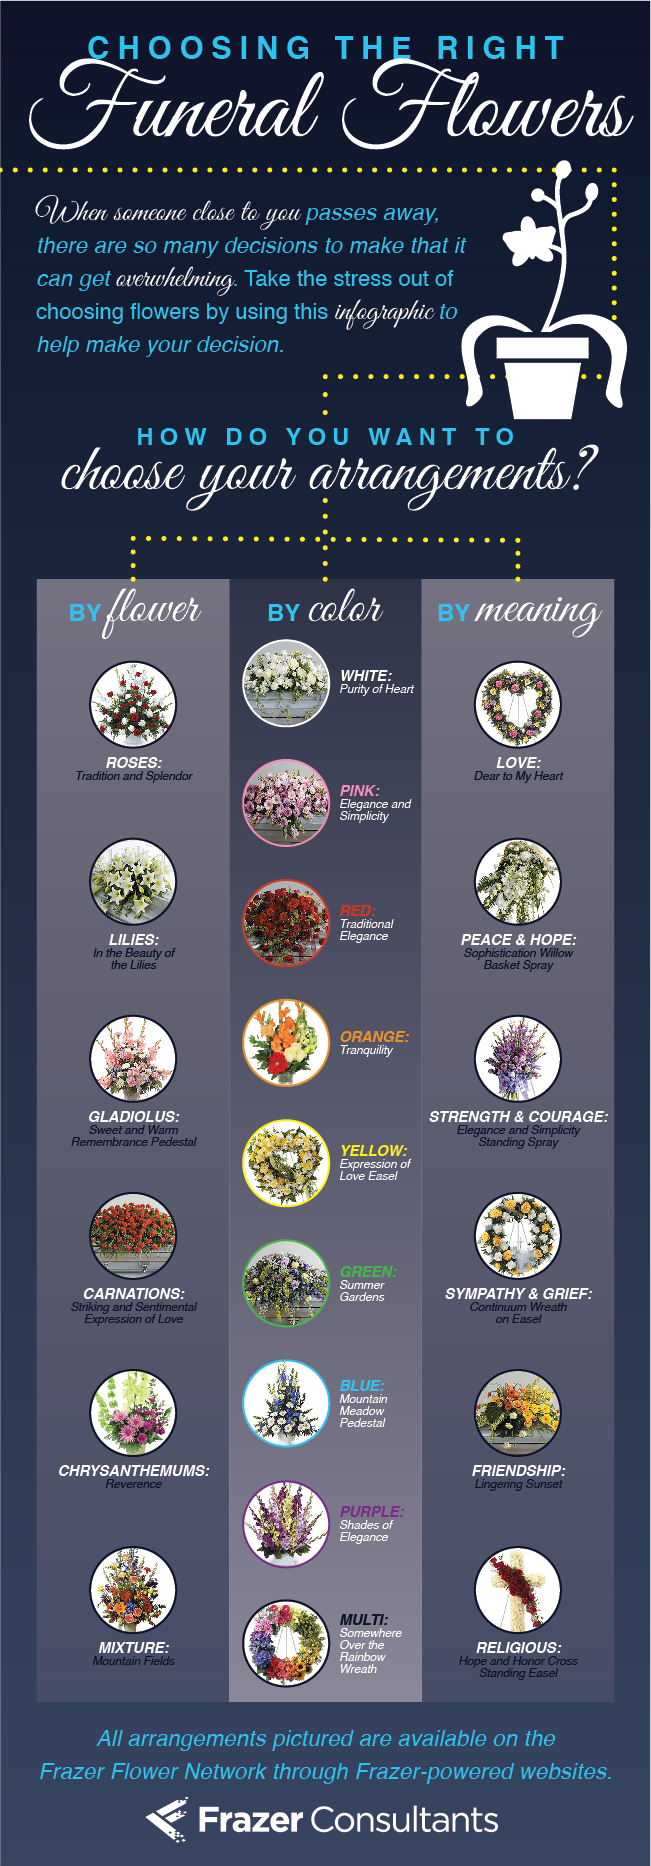 An infographic about selecting funeral flowers